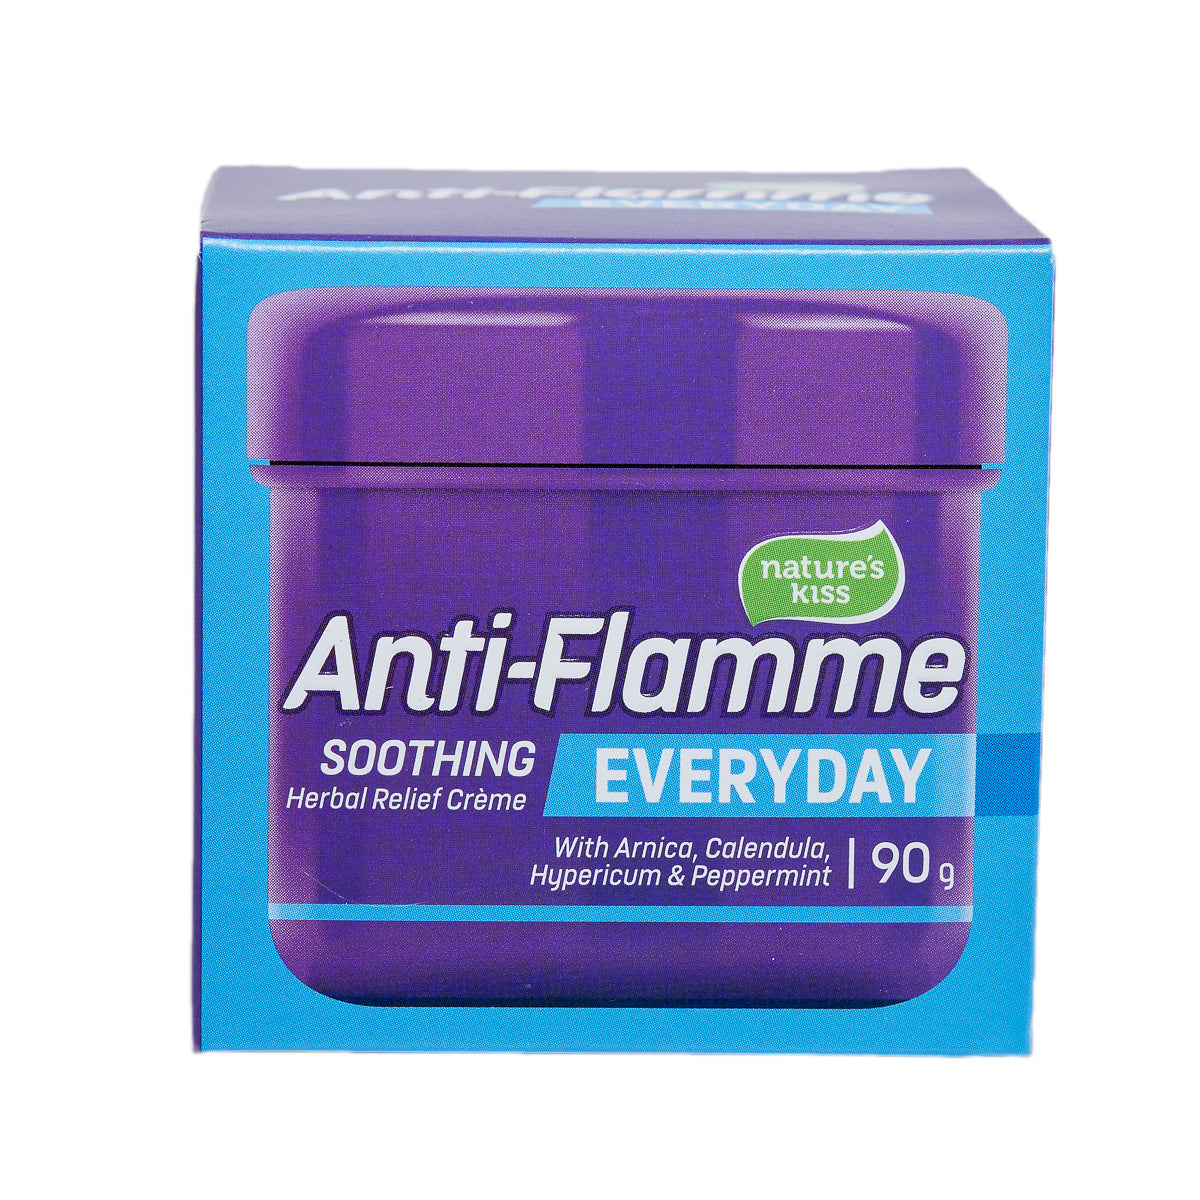 Nature’s Kiss Anti-Flamme Everyday (90g)